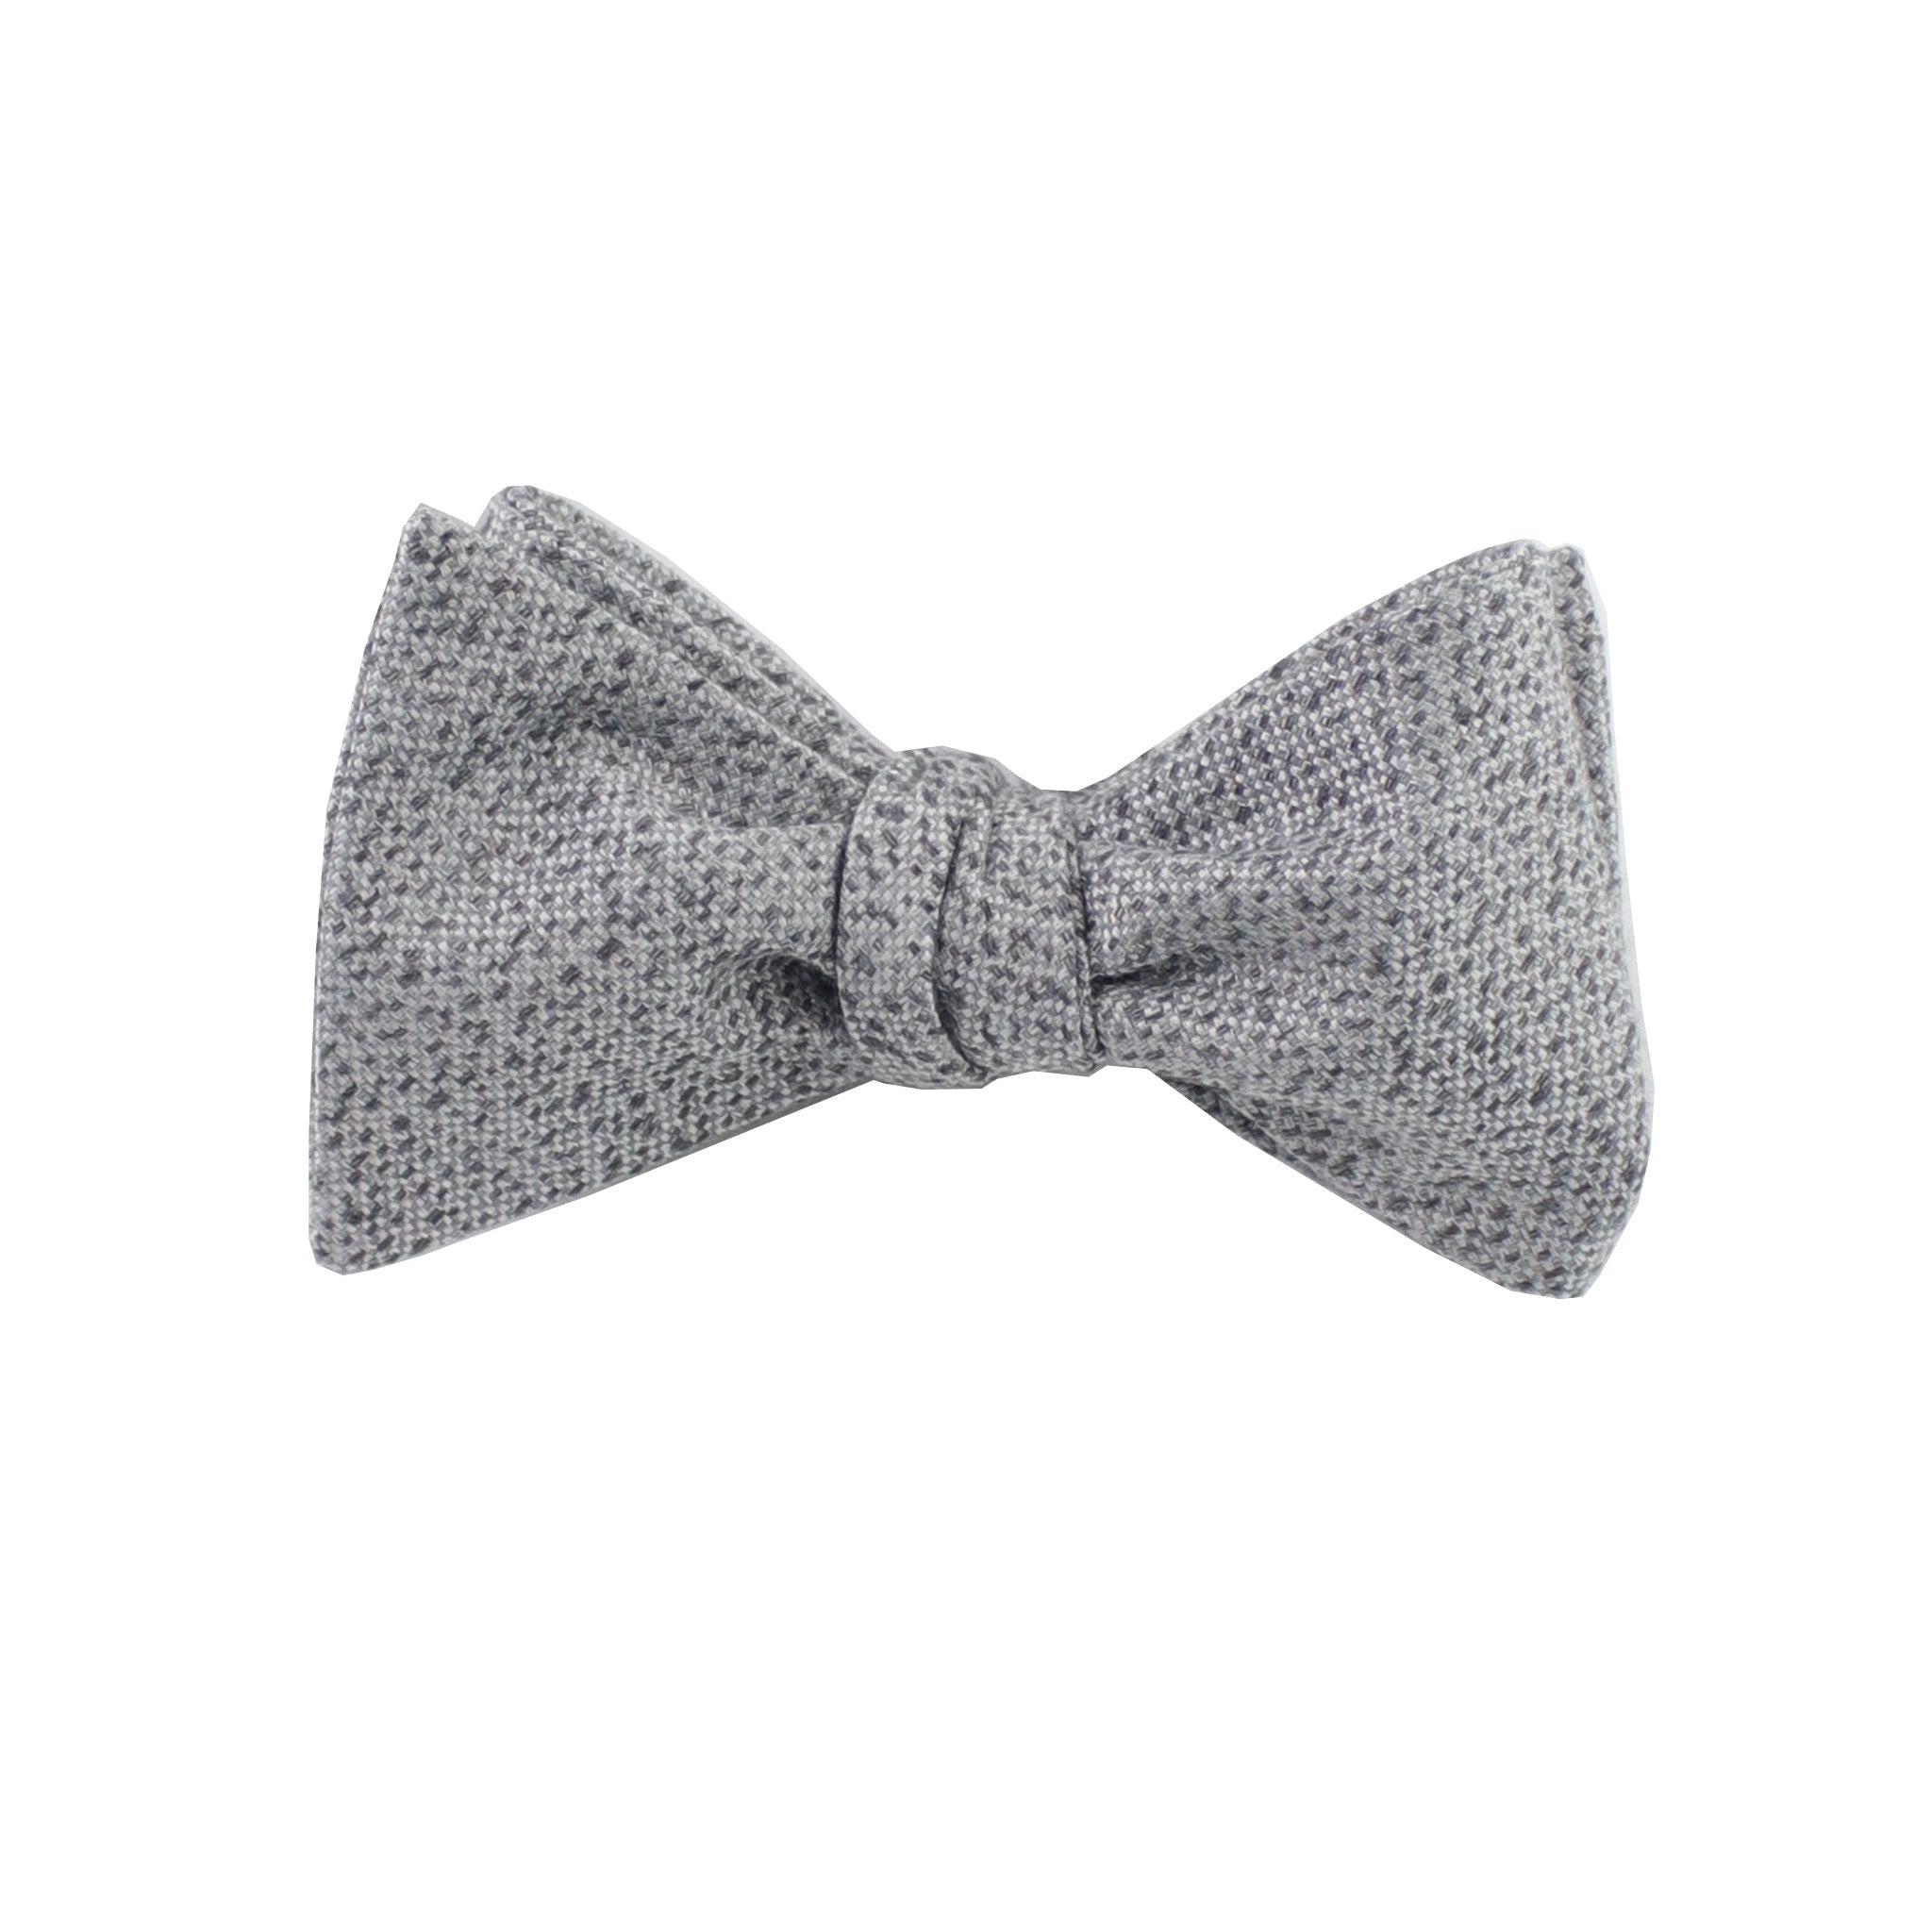 Silver & Charcoal Heather Self Tie Bow Tie from DIBI